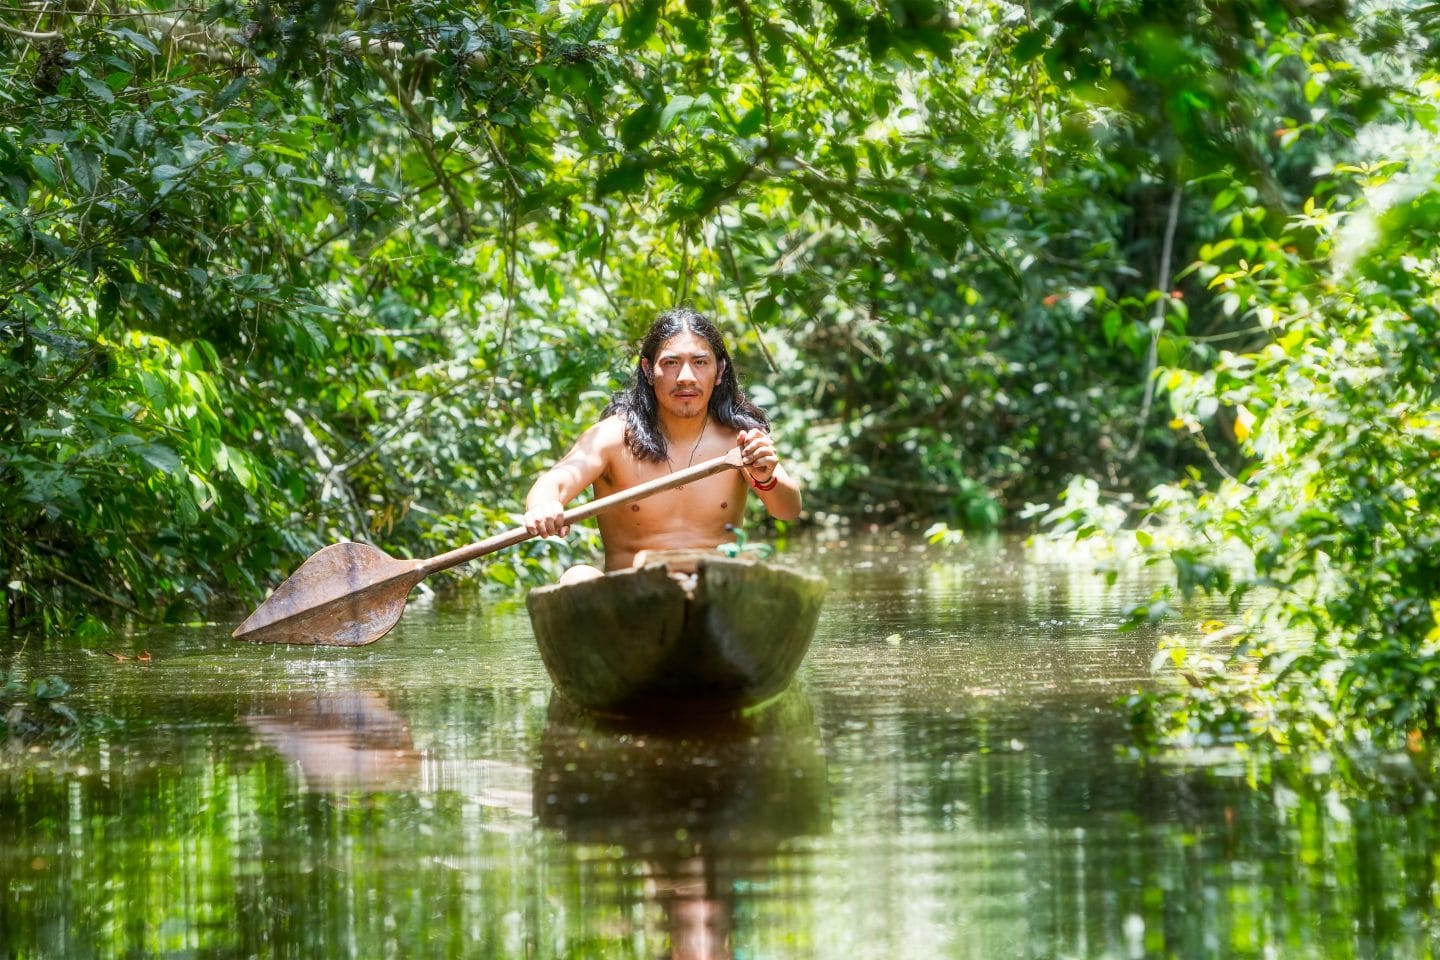 Head deep into the Amazon, dance to bossa nova on the beach and explore old colonial towns.